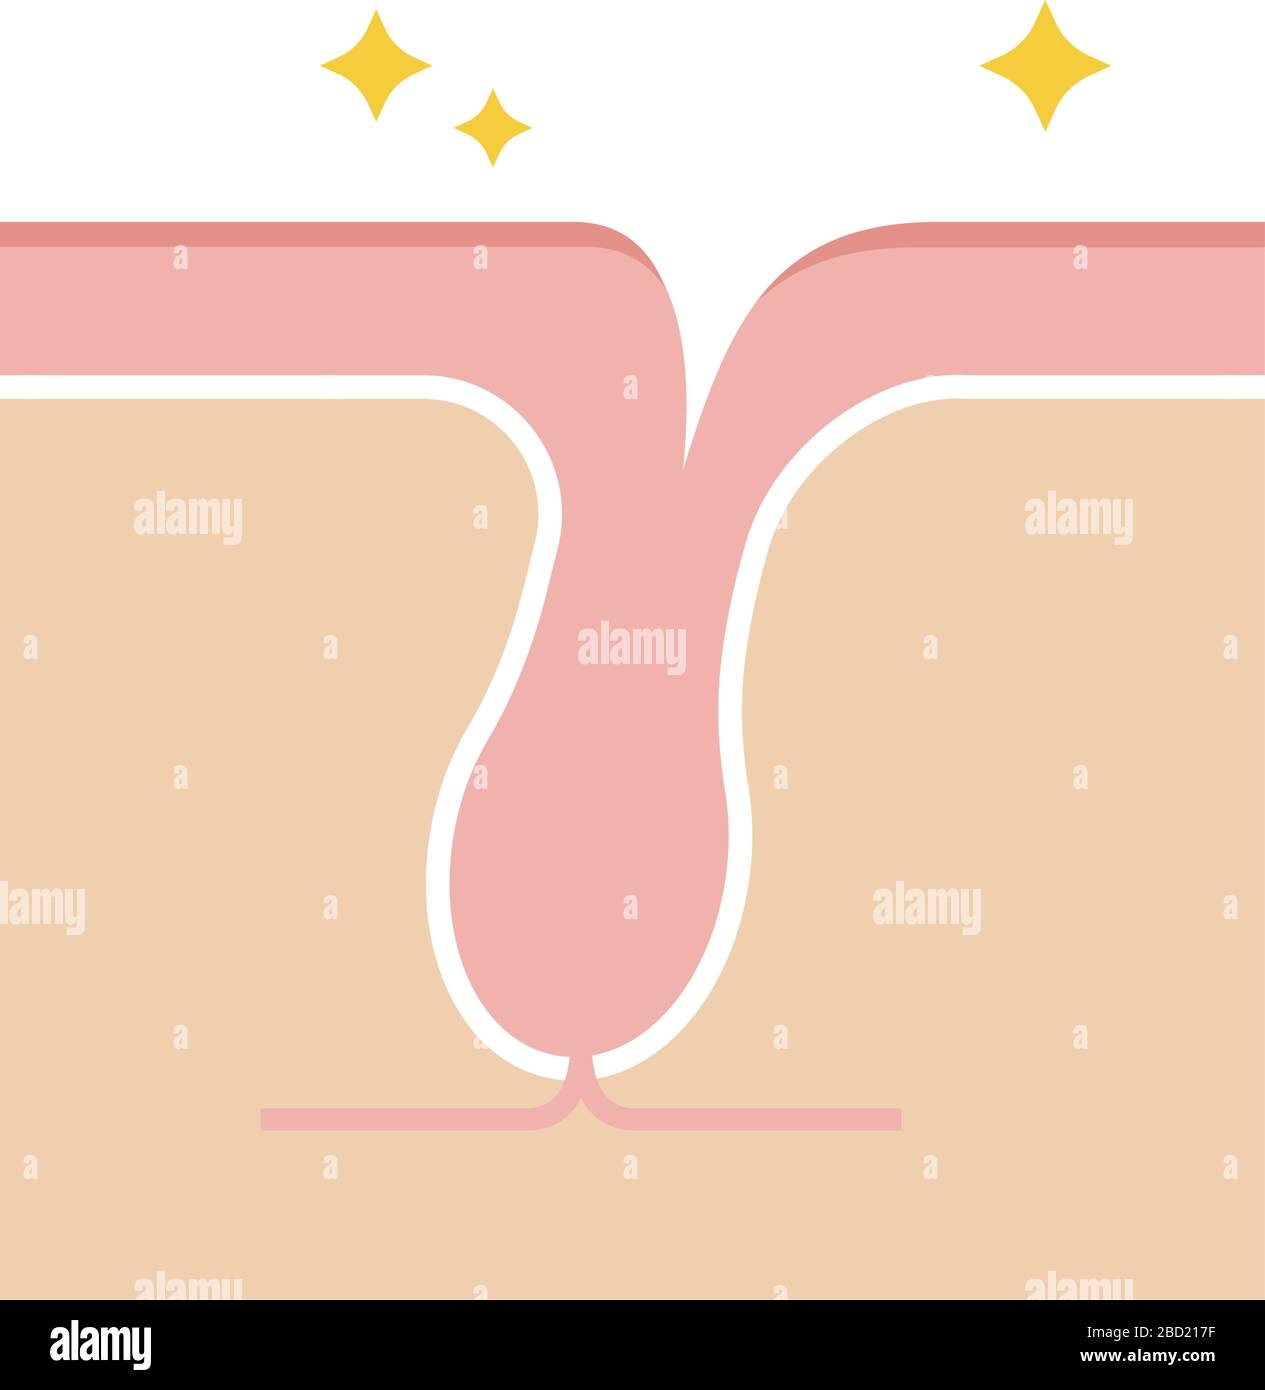 Structure illustration of pores / Clean pore Stock Vector